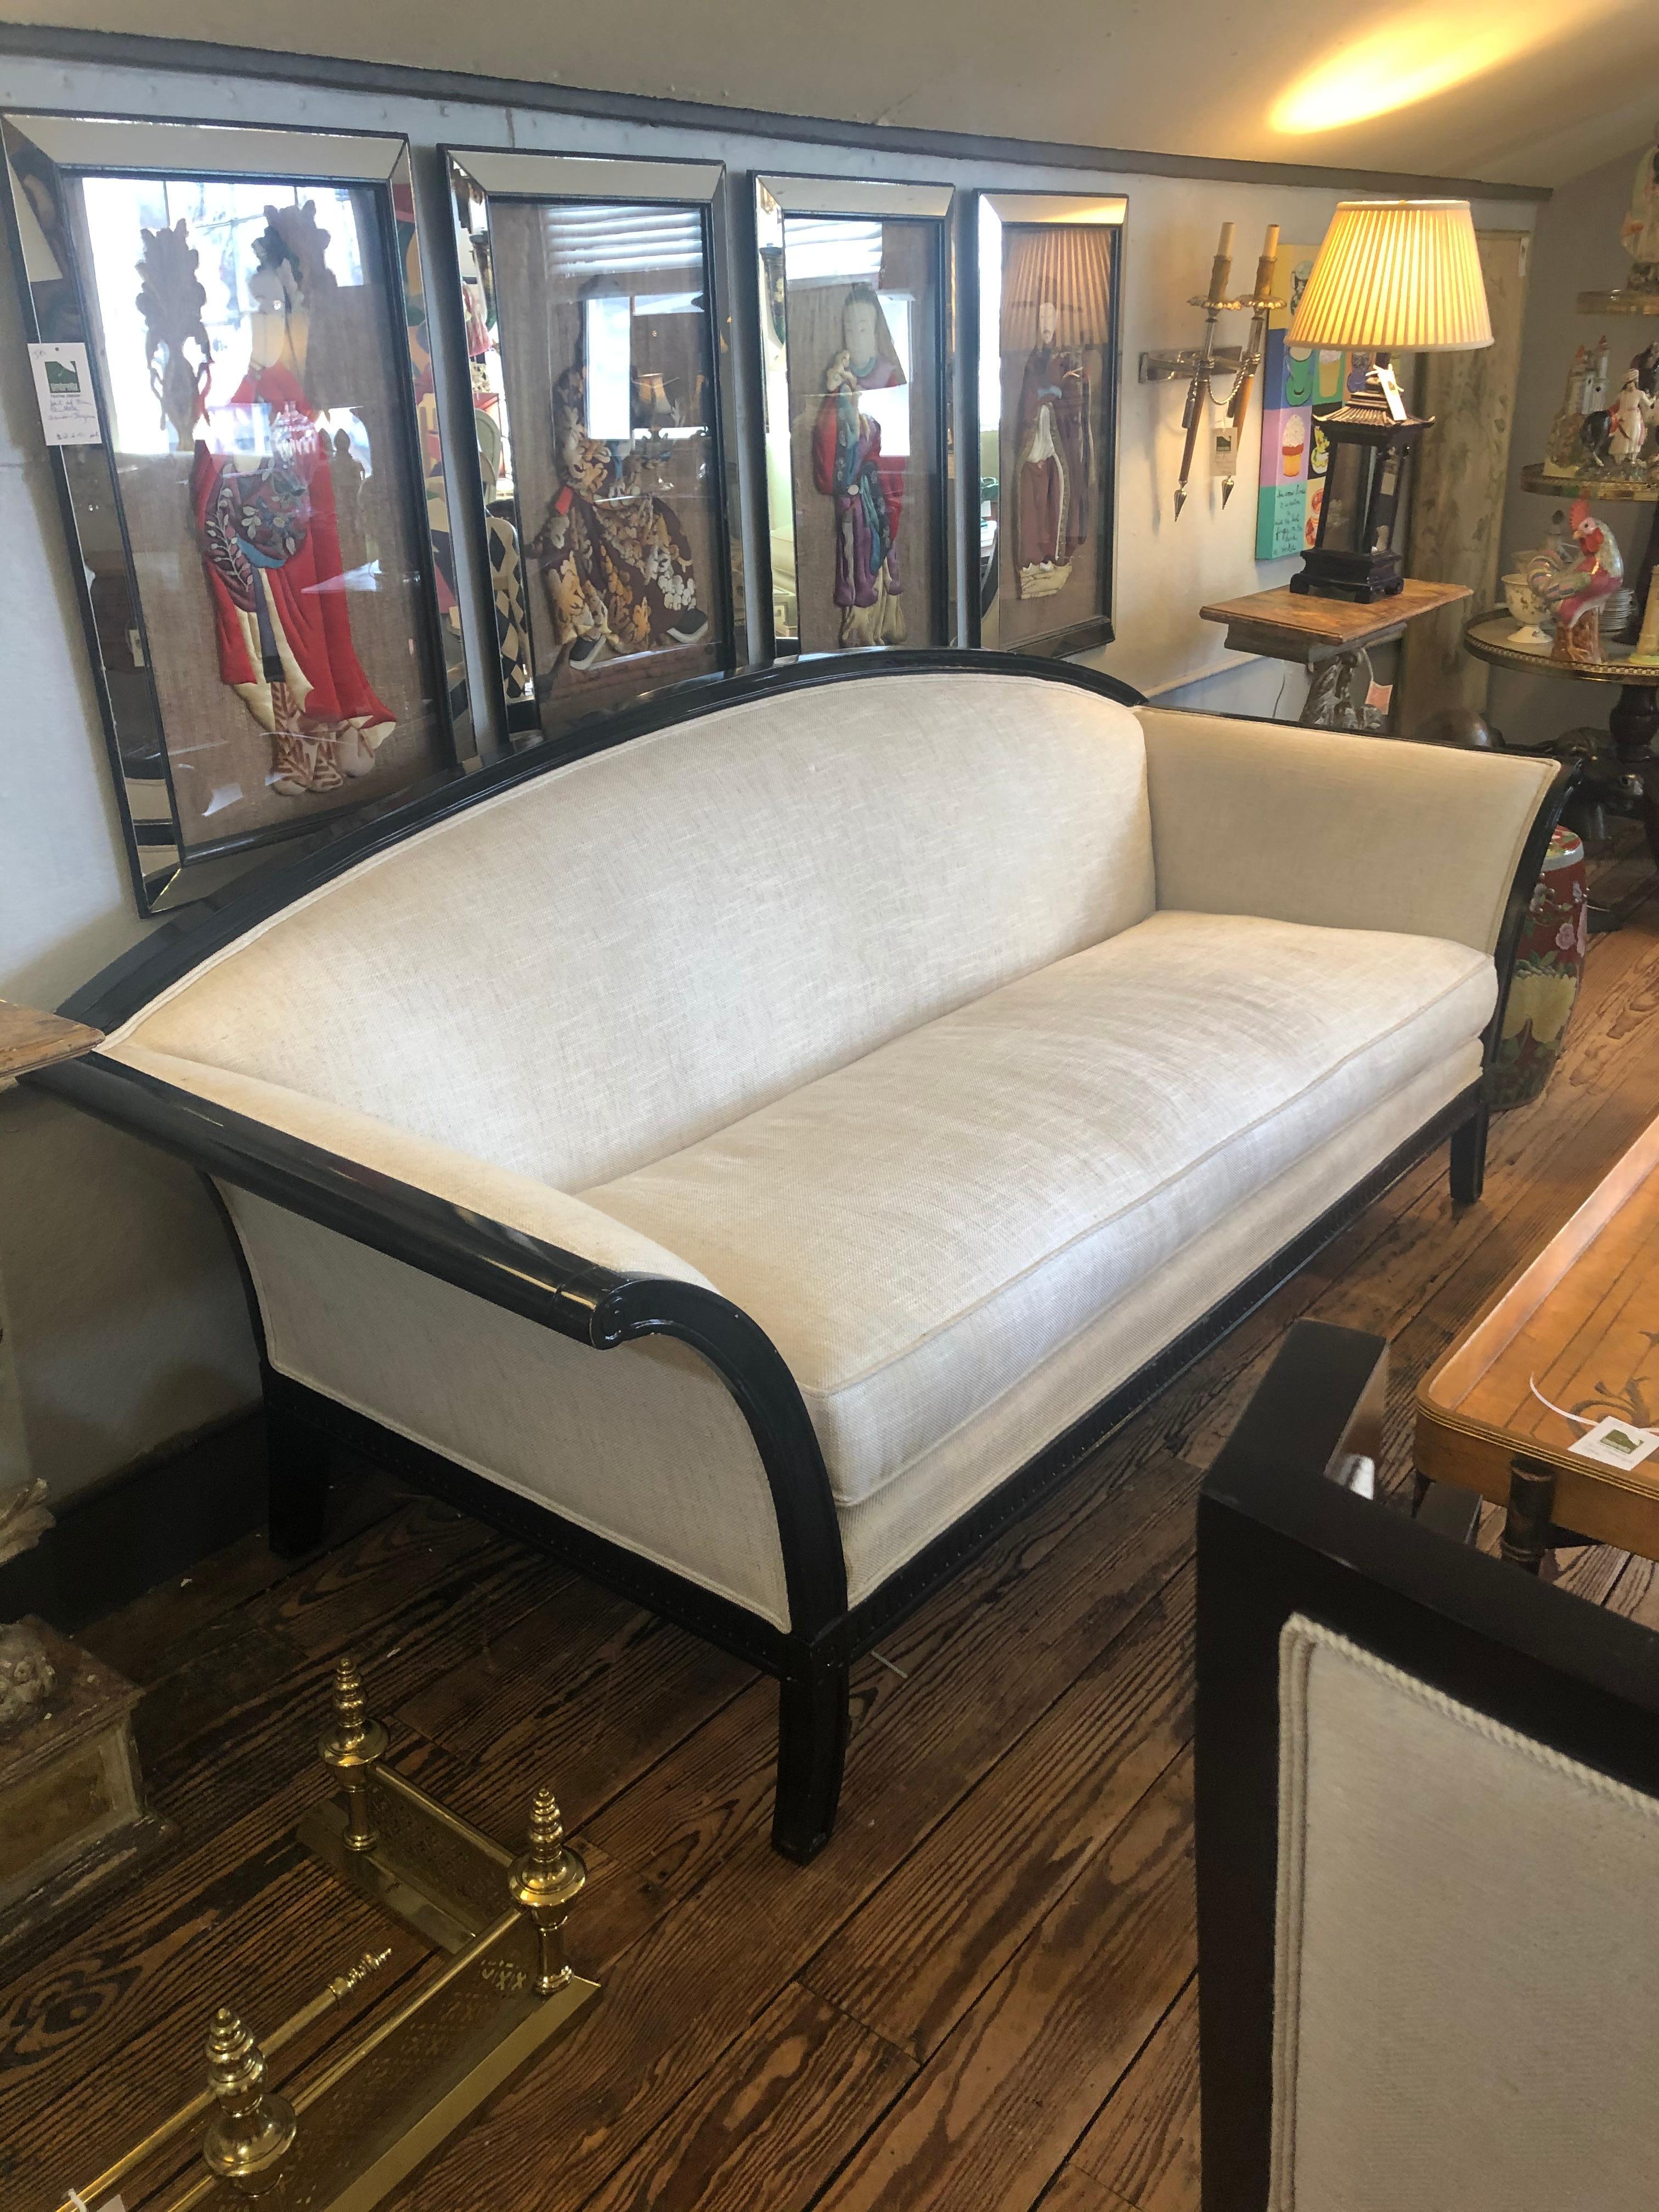 Very stylish sofa having black lacquer wood frame with curved back and splayed arms and legs, upholstered in a neutral nicely contrasting cream linen. Finished on the back so beautiful from every angle.